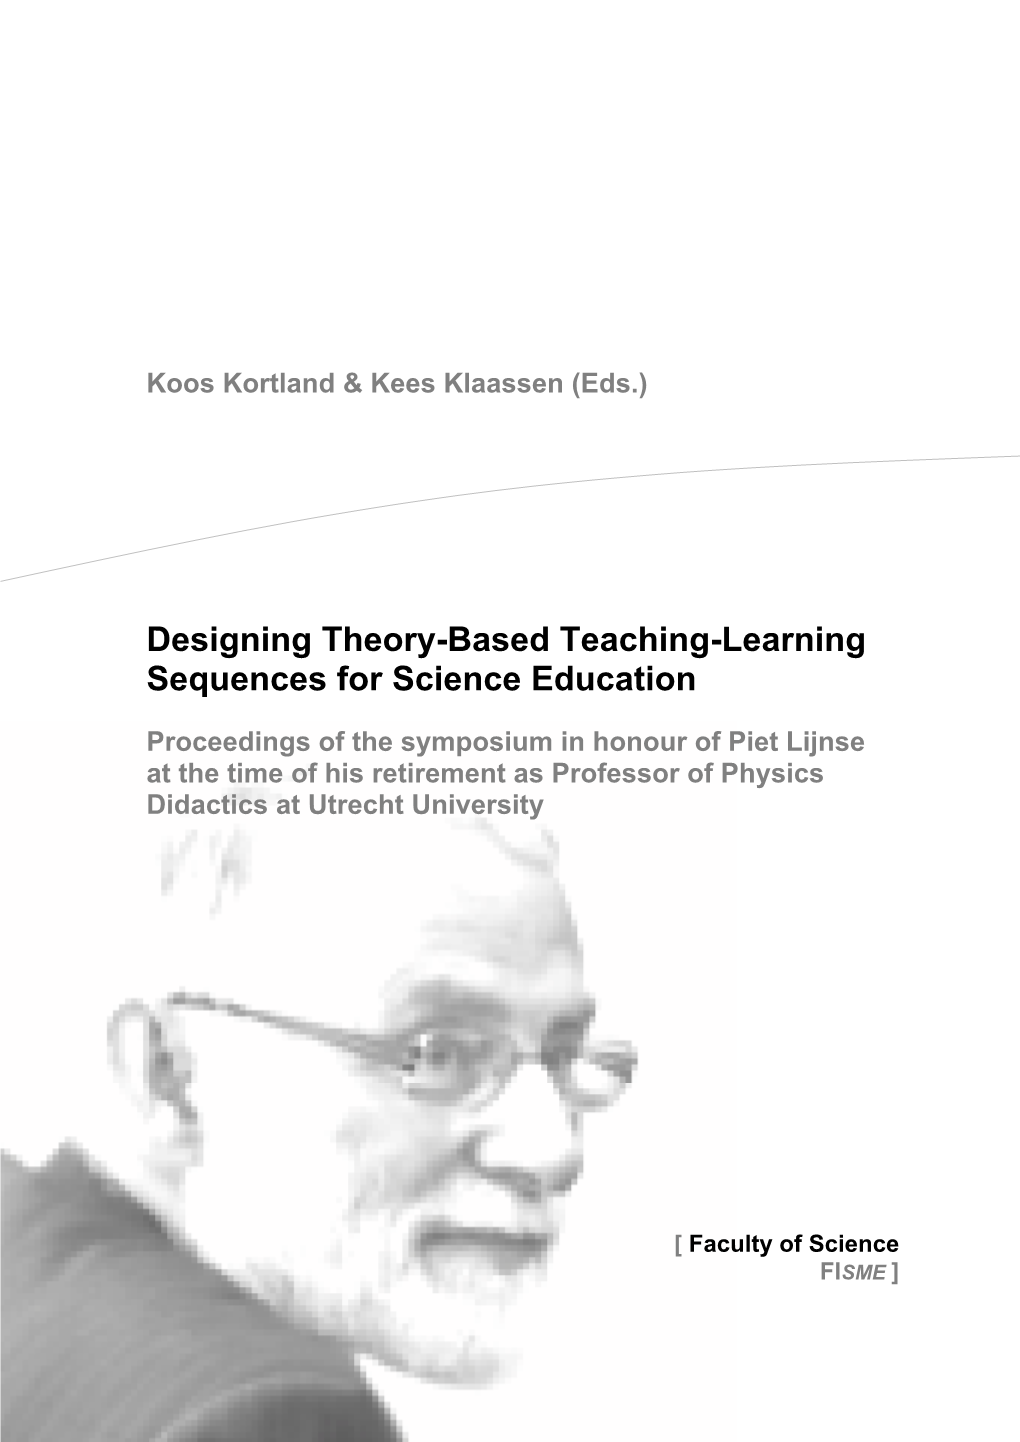 Designing Theory-Based Teaching-Learning Sequences for Science Education